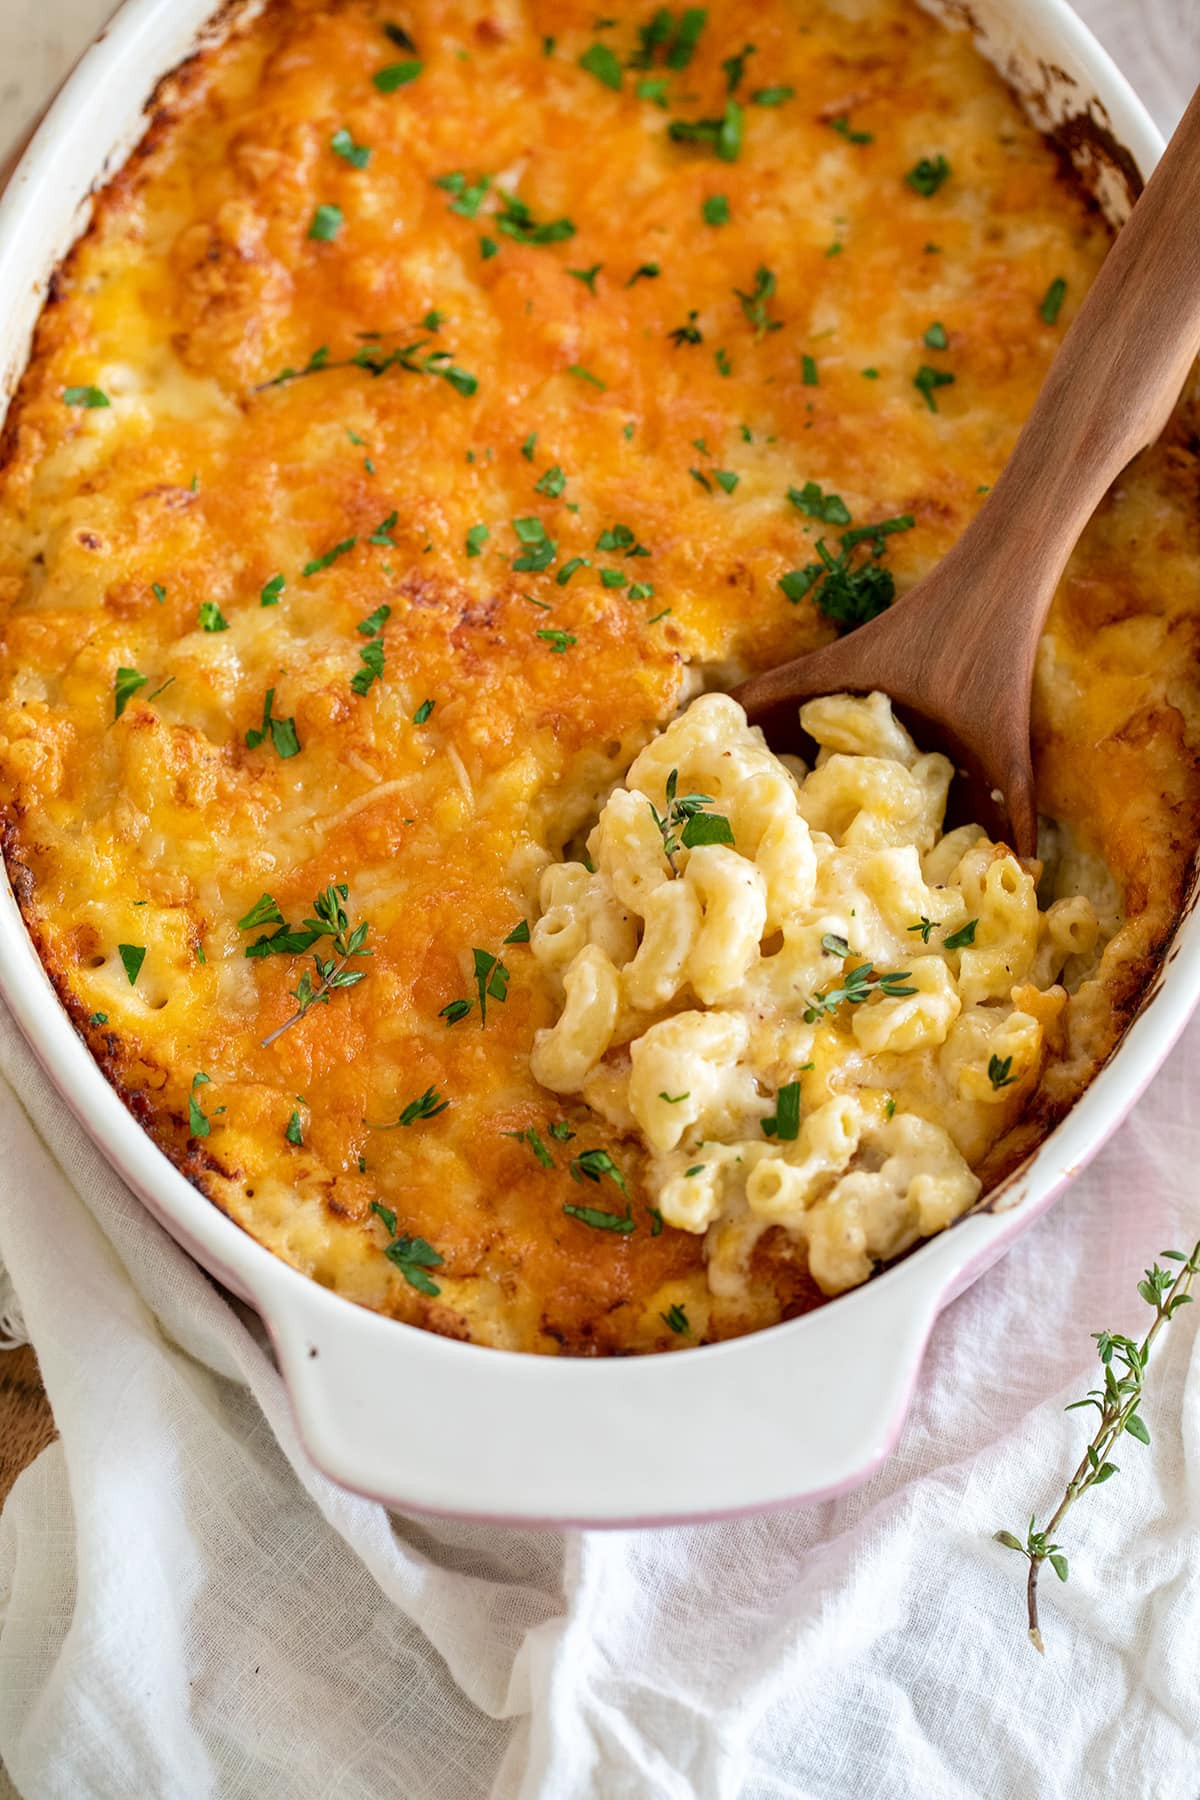 Our Most Shared Baked Macaroni and Cheese with Cream Cheese
 Ever